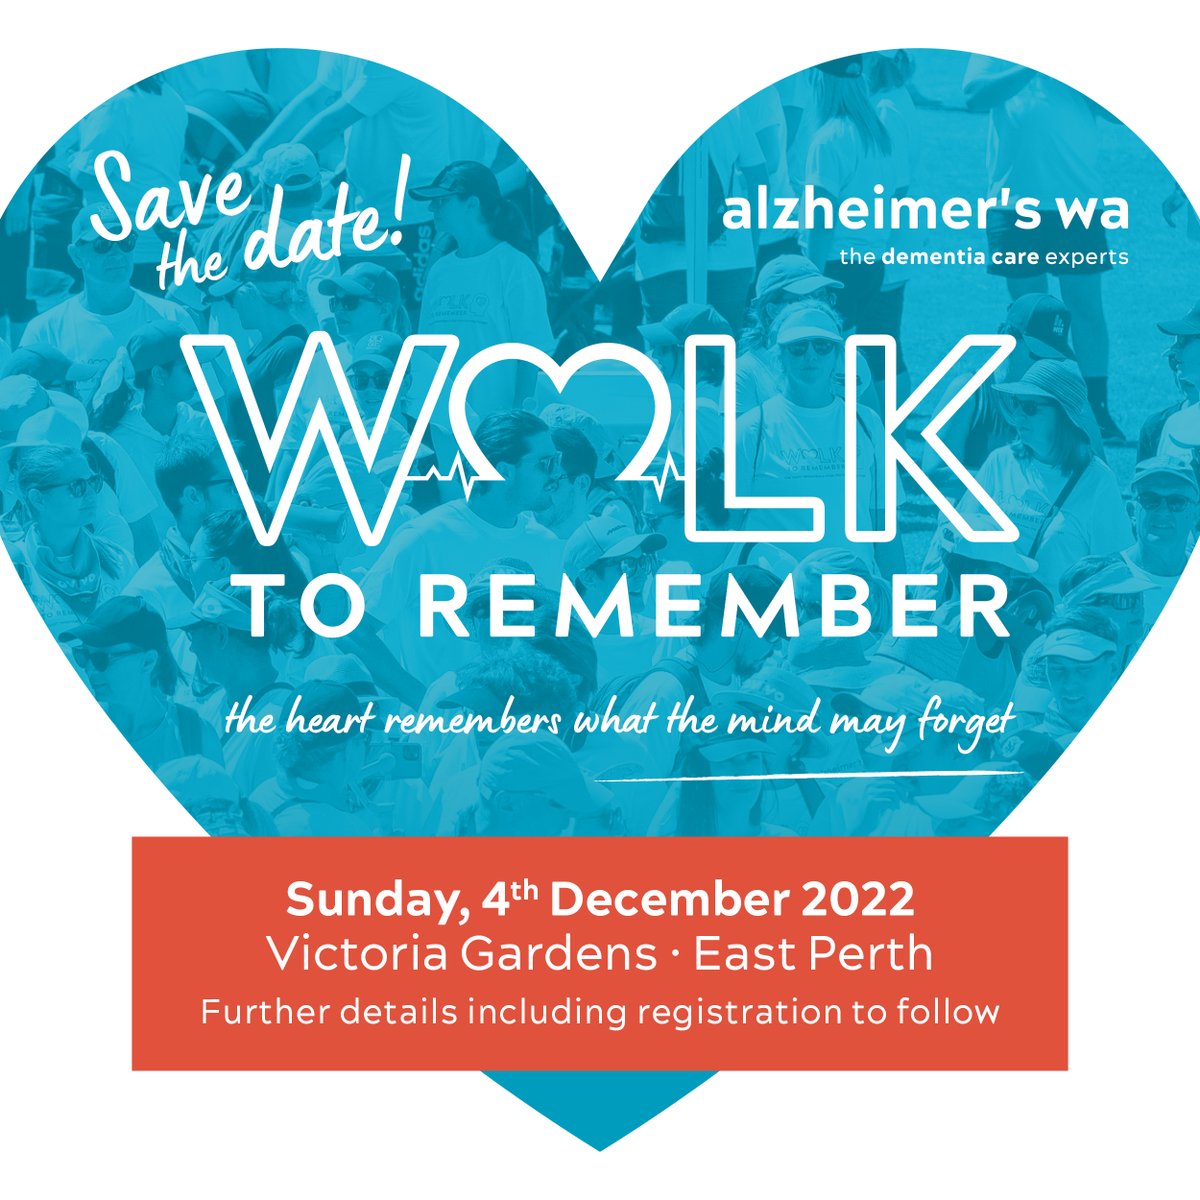 Put this one in your calendar and get excited! 😁 We are delighted to finally announce our date and location for our 2022 Walk to Remember event! 🚶‍♀️🚶‍♂️ Watch this space for vital information including registration and merchandise coming VERY SOON. We hope to see you there! 🙌